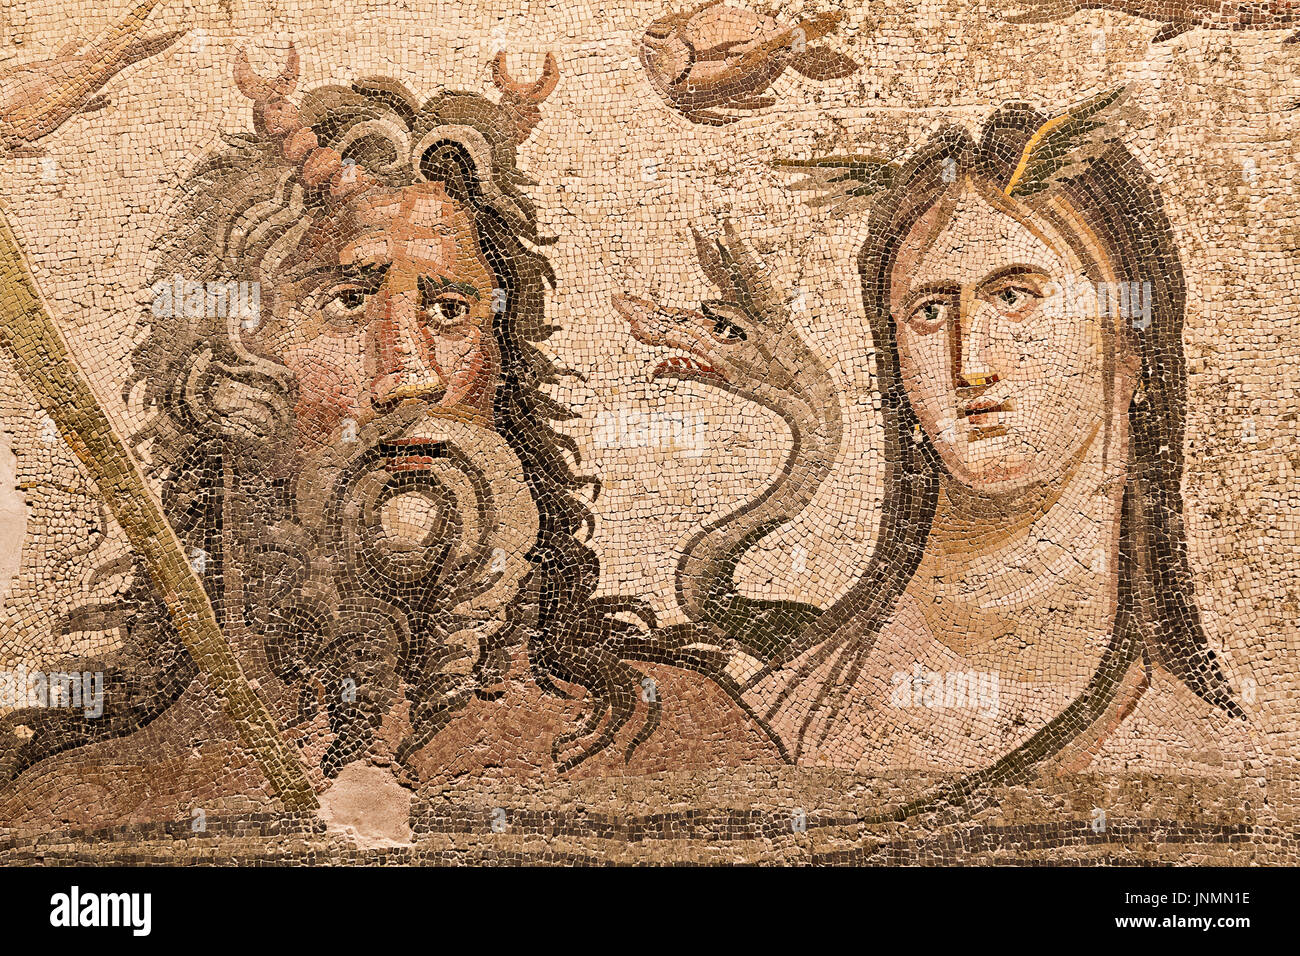 Roman mosaic representing Oceanus and Thetys from the ancient site of Zeugma in Gaziantep, Turkey. Stock Photo